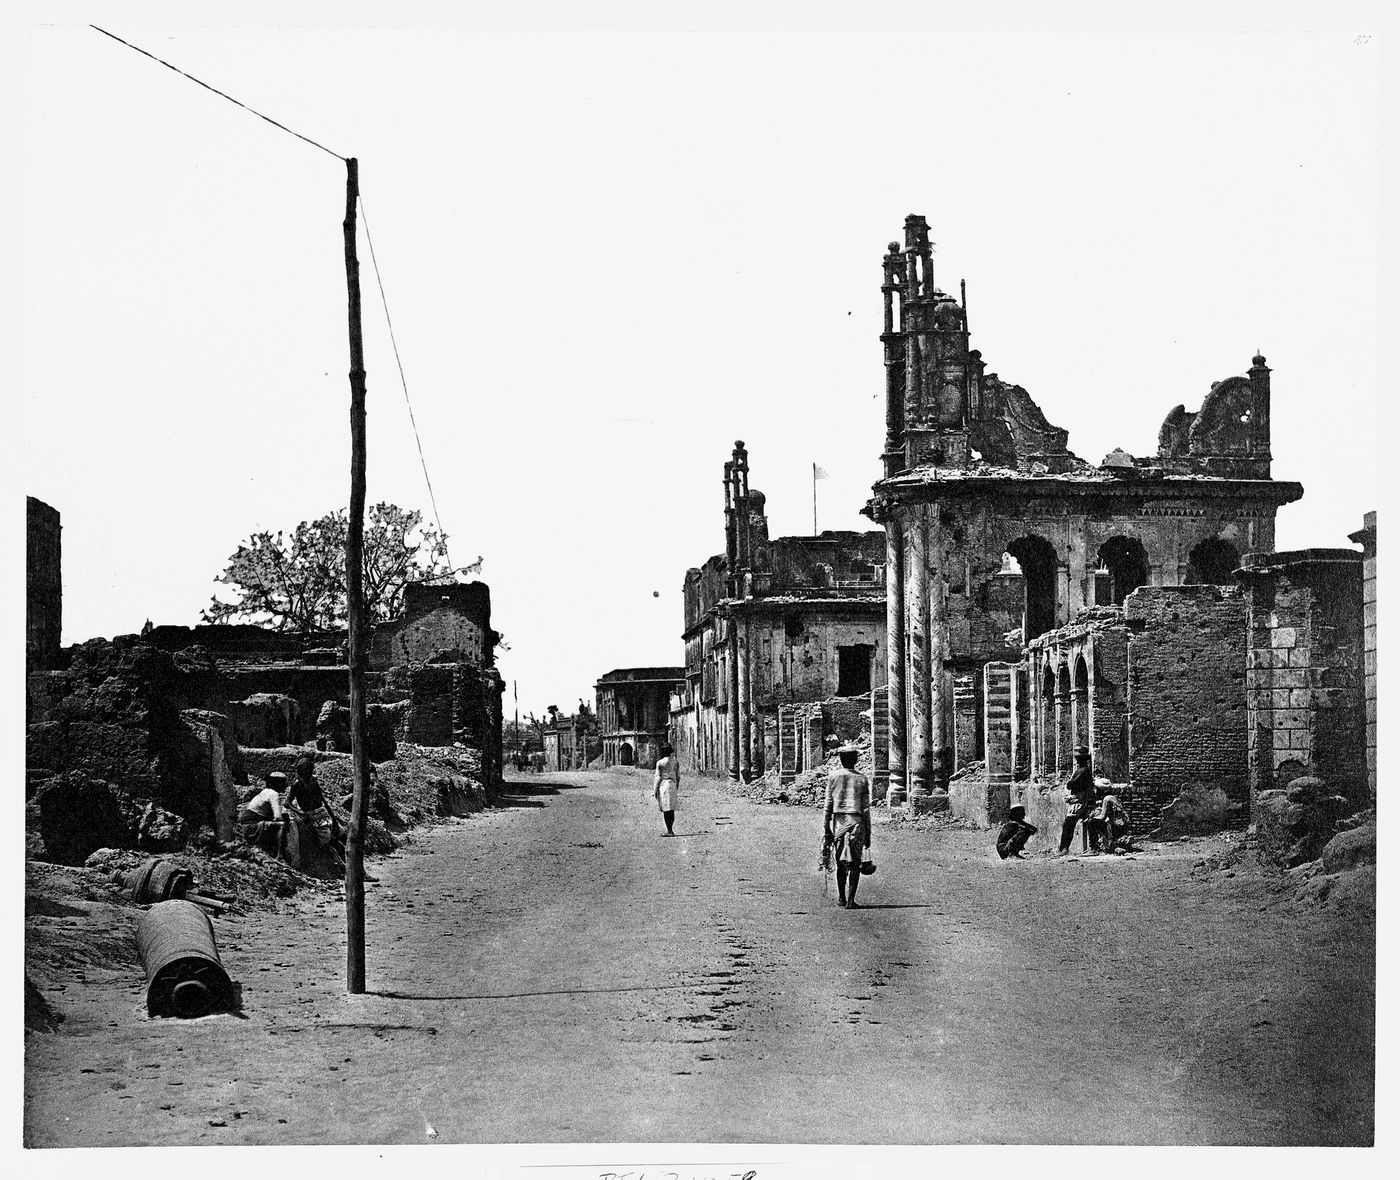 View of the ruins along the Kanpur Road, Lucknow, India